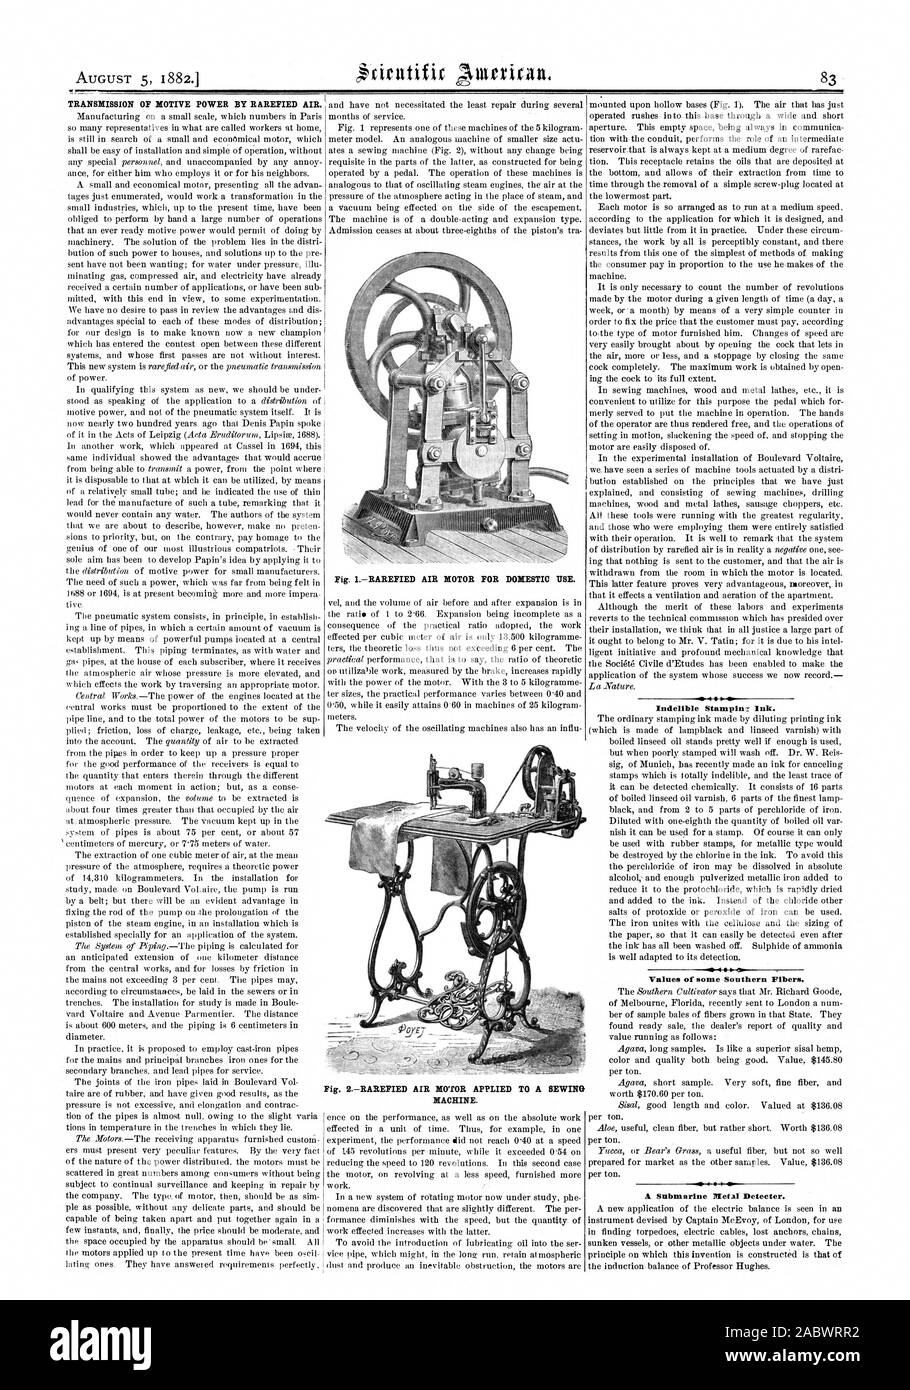 TRANSMISSION OF MOTIVE POWER BY RAREFIED AIR. Indelible Stampinz Ink. Values of some Southern Fibers. A Submarine Metal Deteeter., scientific american, 1882-08-05 Stock Photo